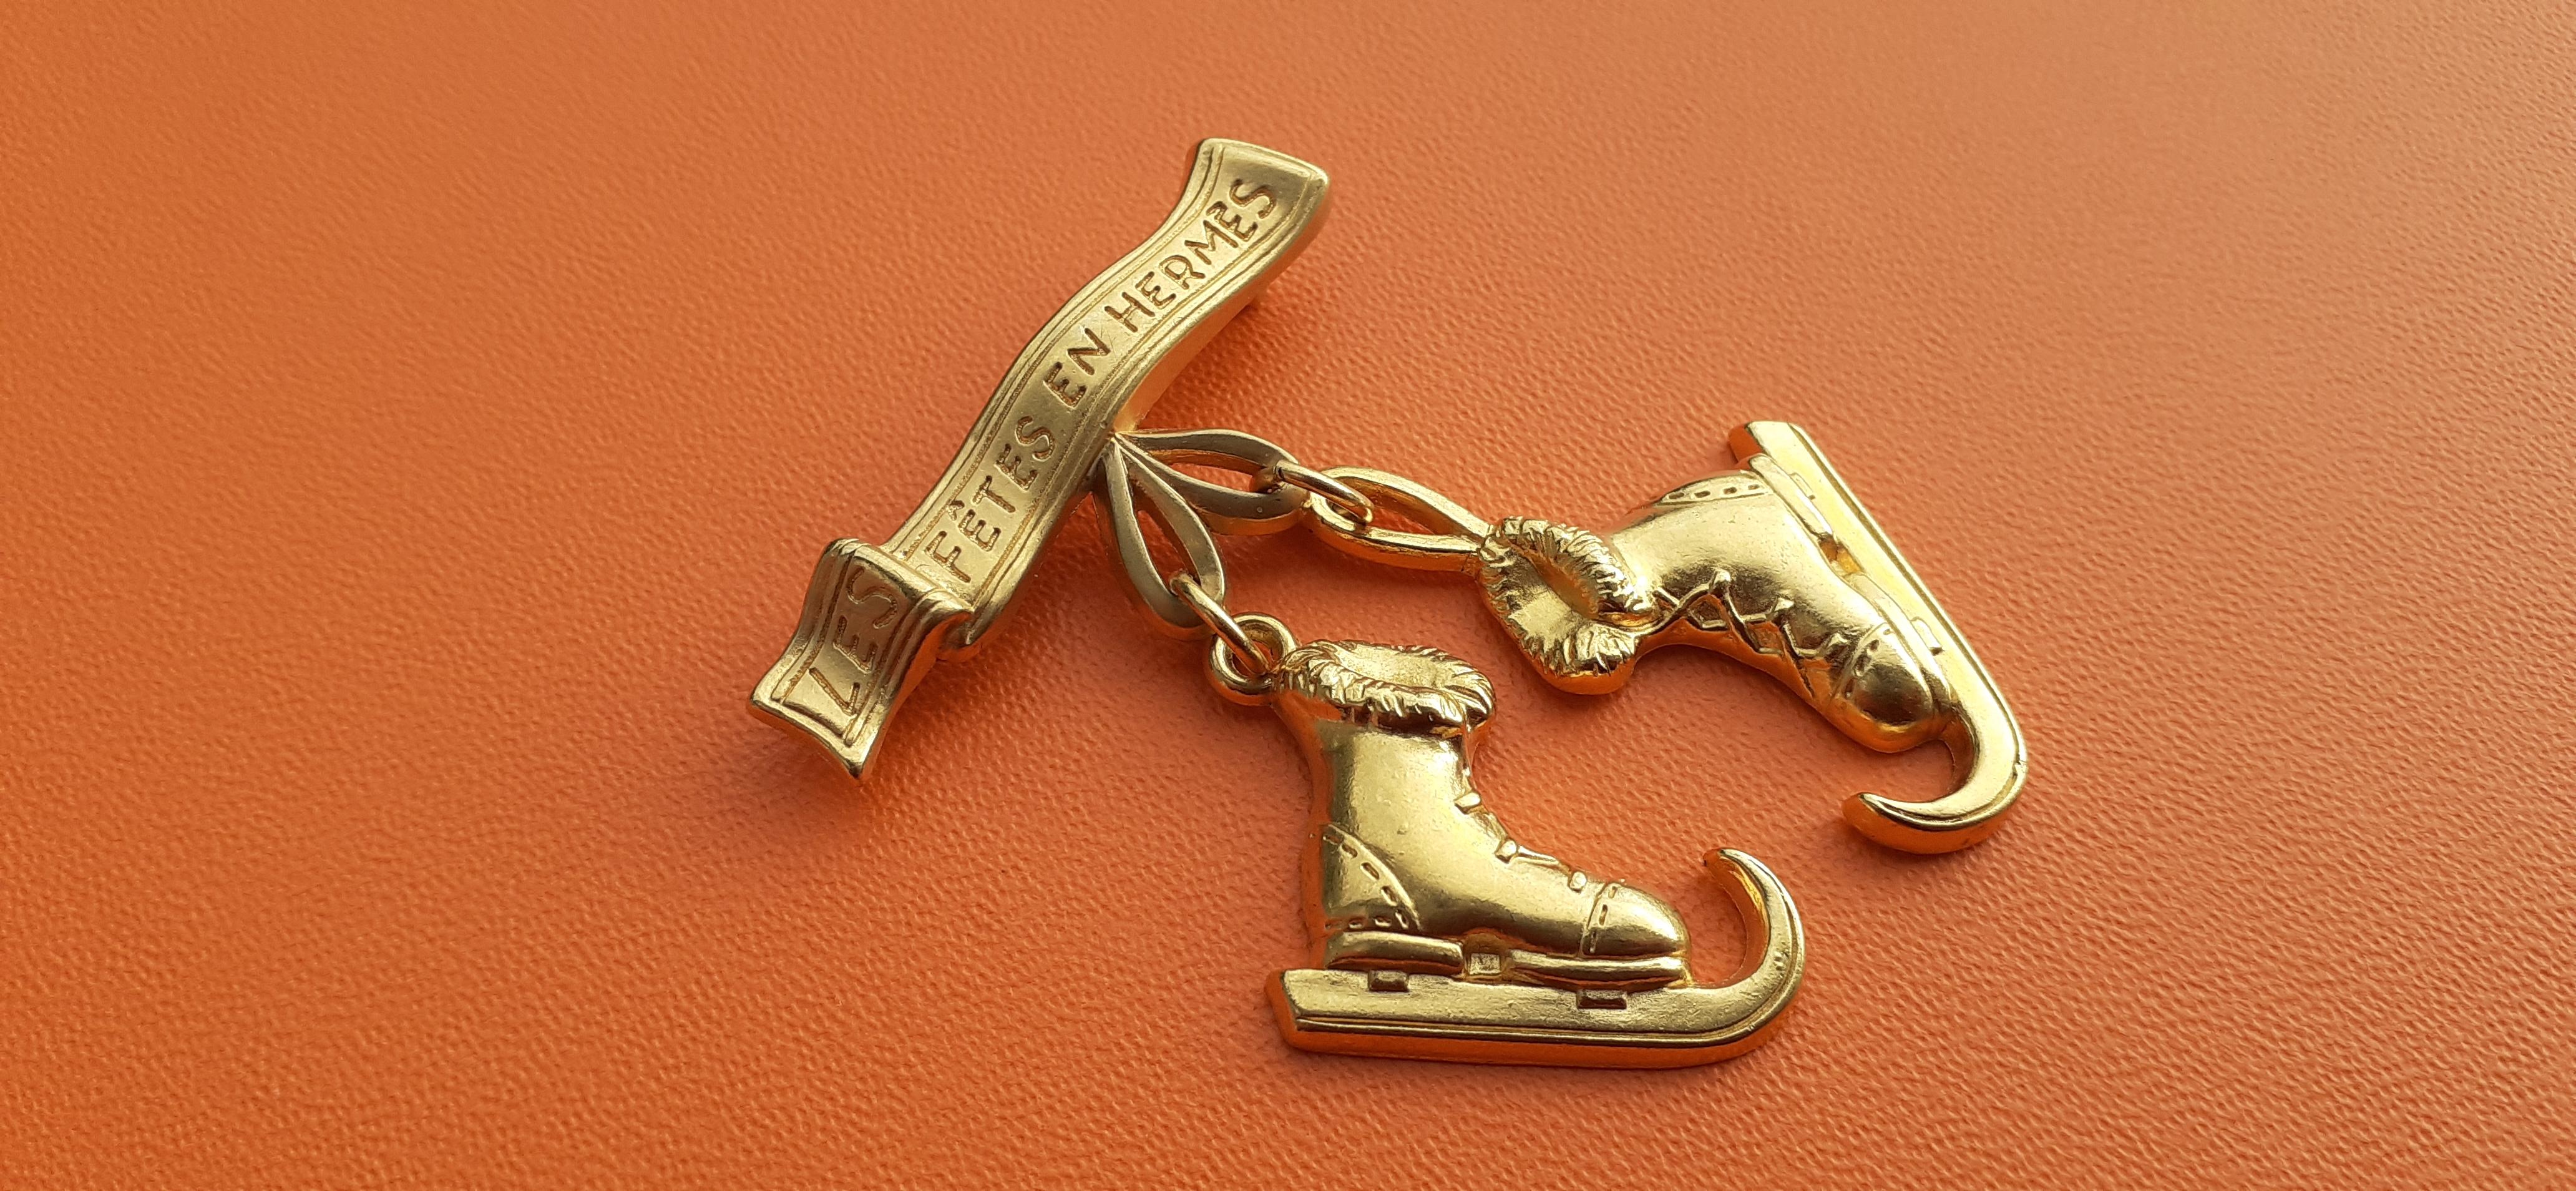 Beautiful Authentic Hermès Brooch

2 mobile charms in shape of ice skates

In the banner is written 